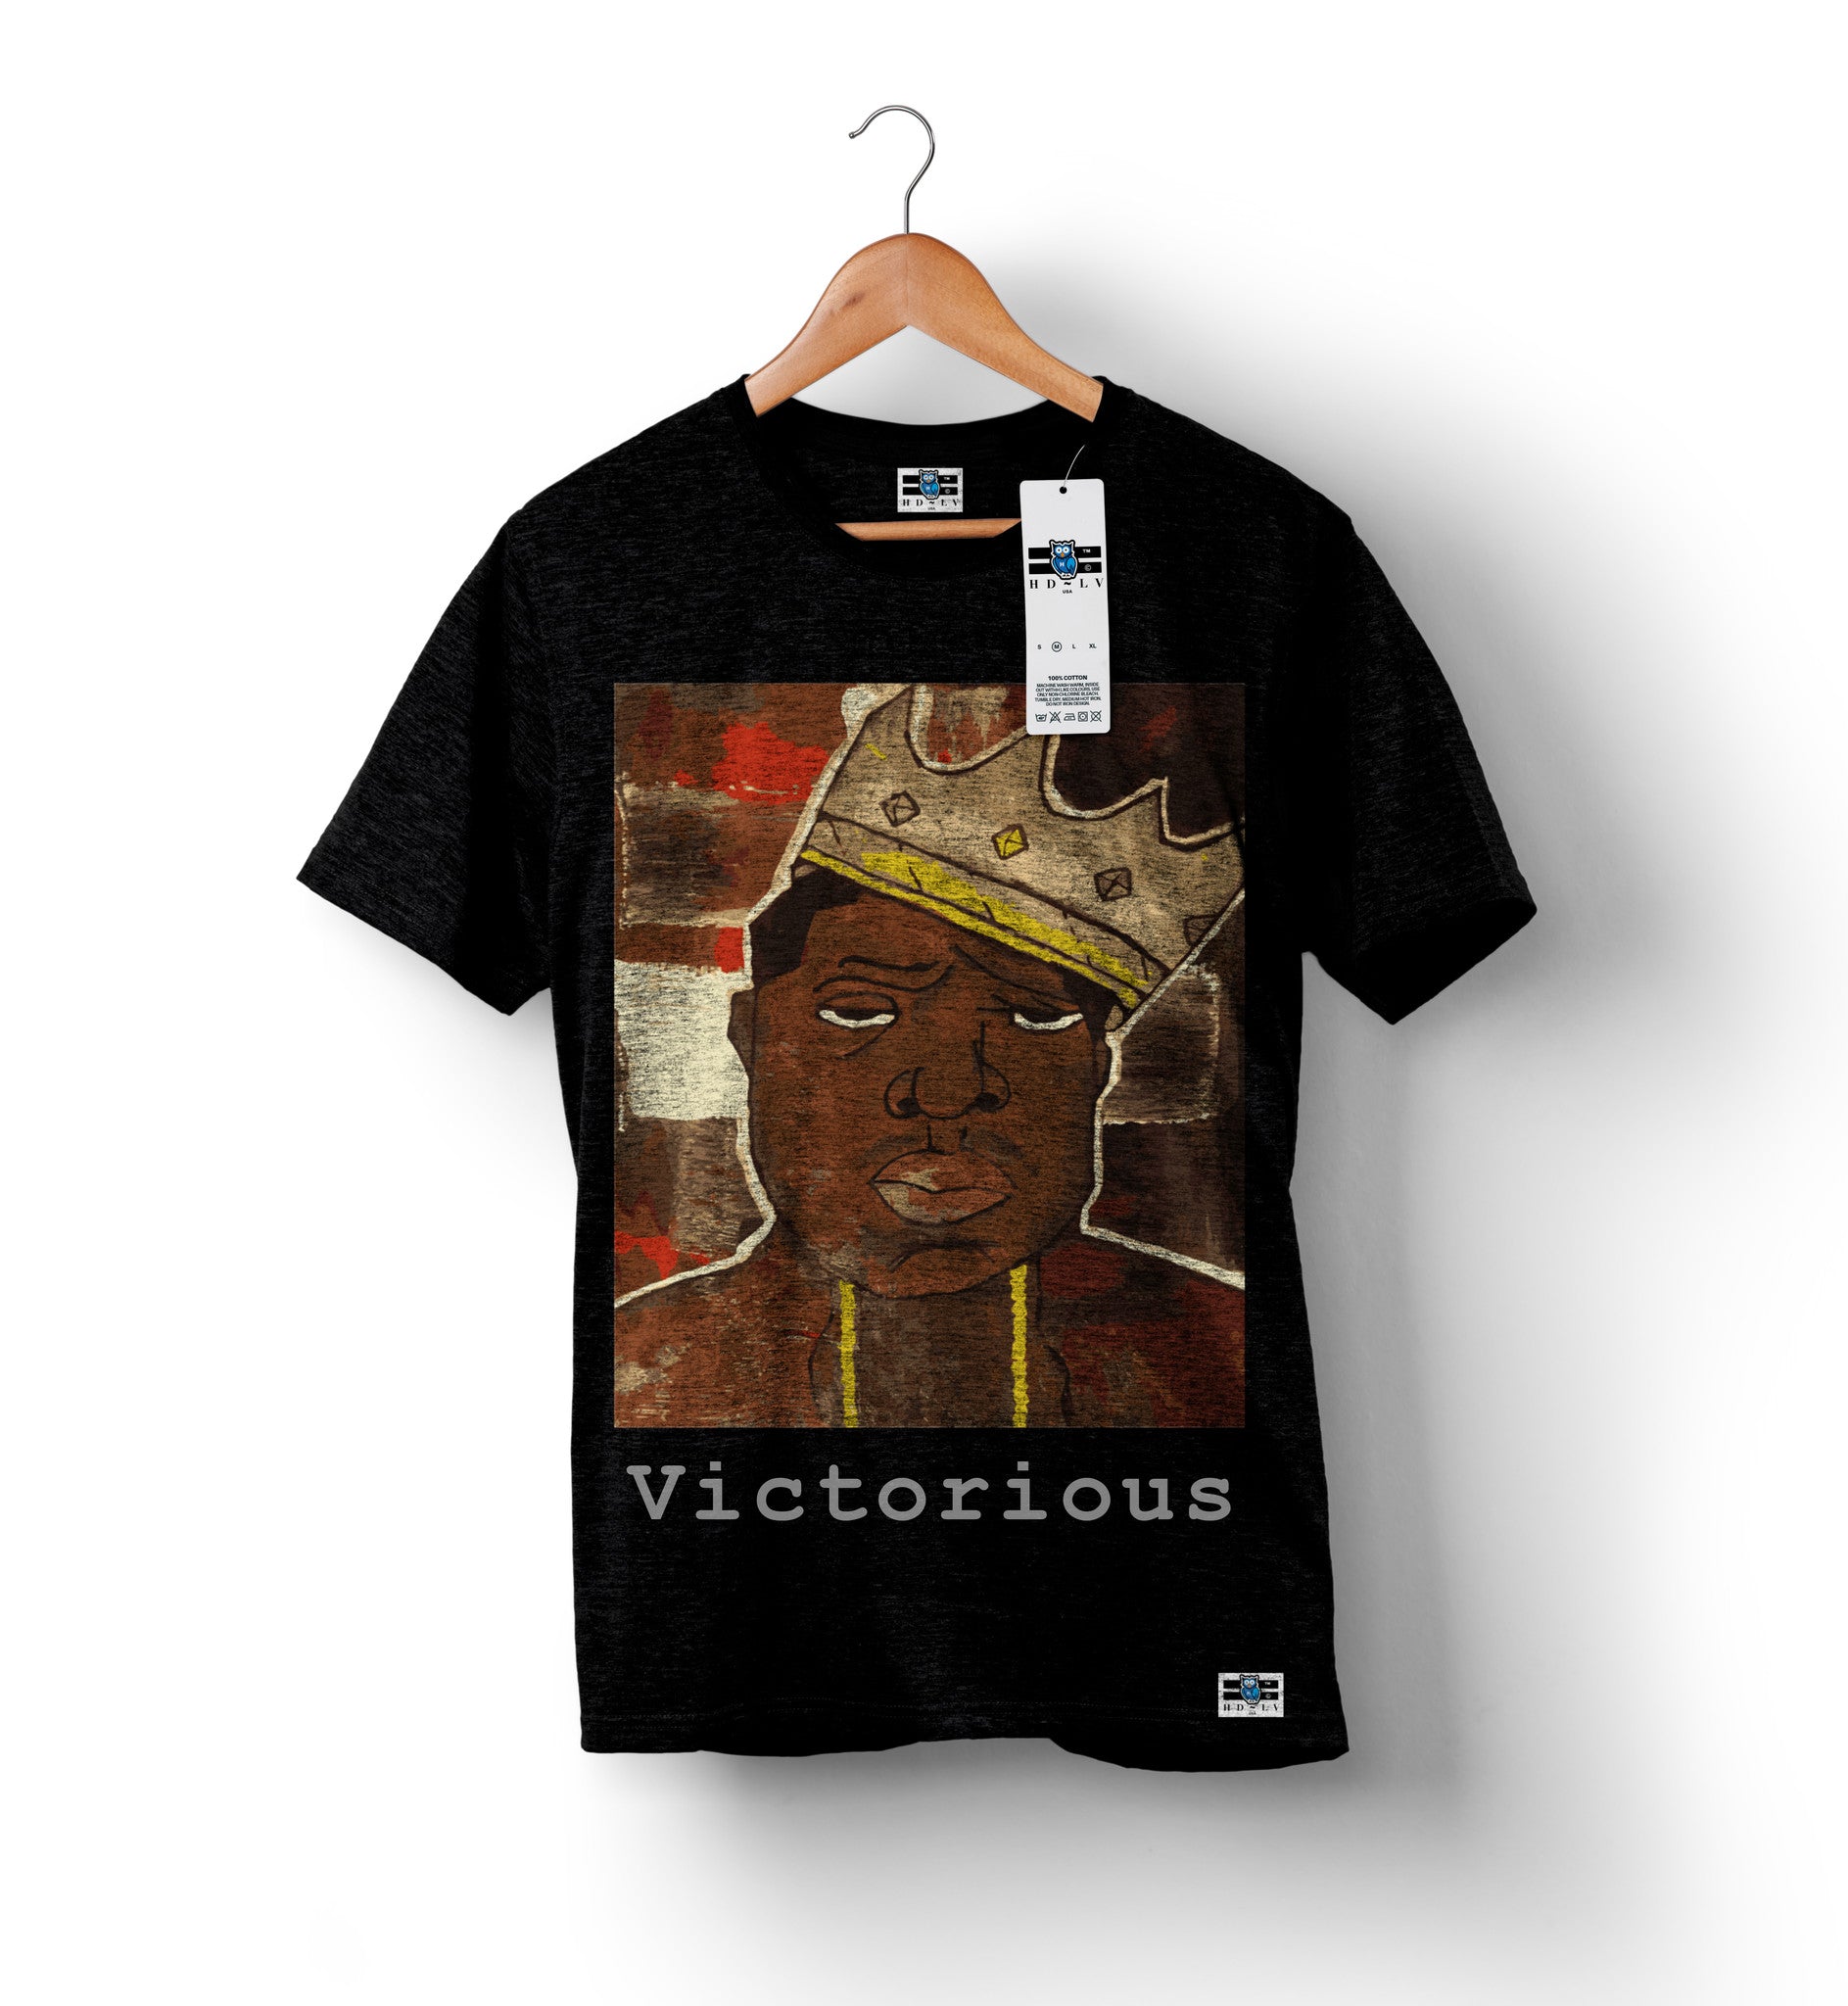 Shop and Buy 1990s Inspired Notorious B.I.G Shirt and Pop Culture Clothes